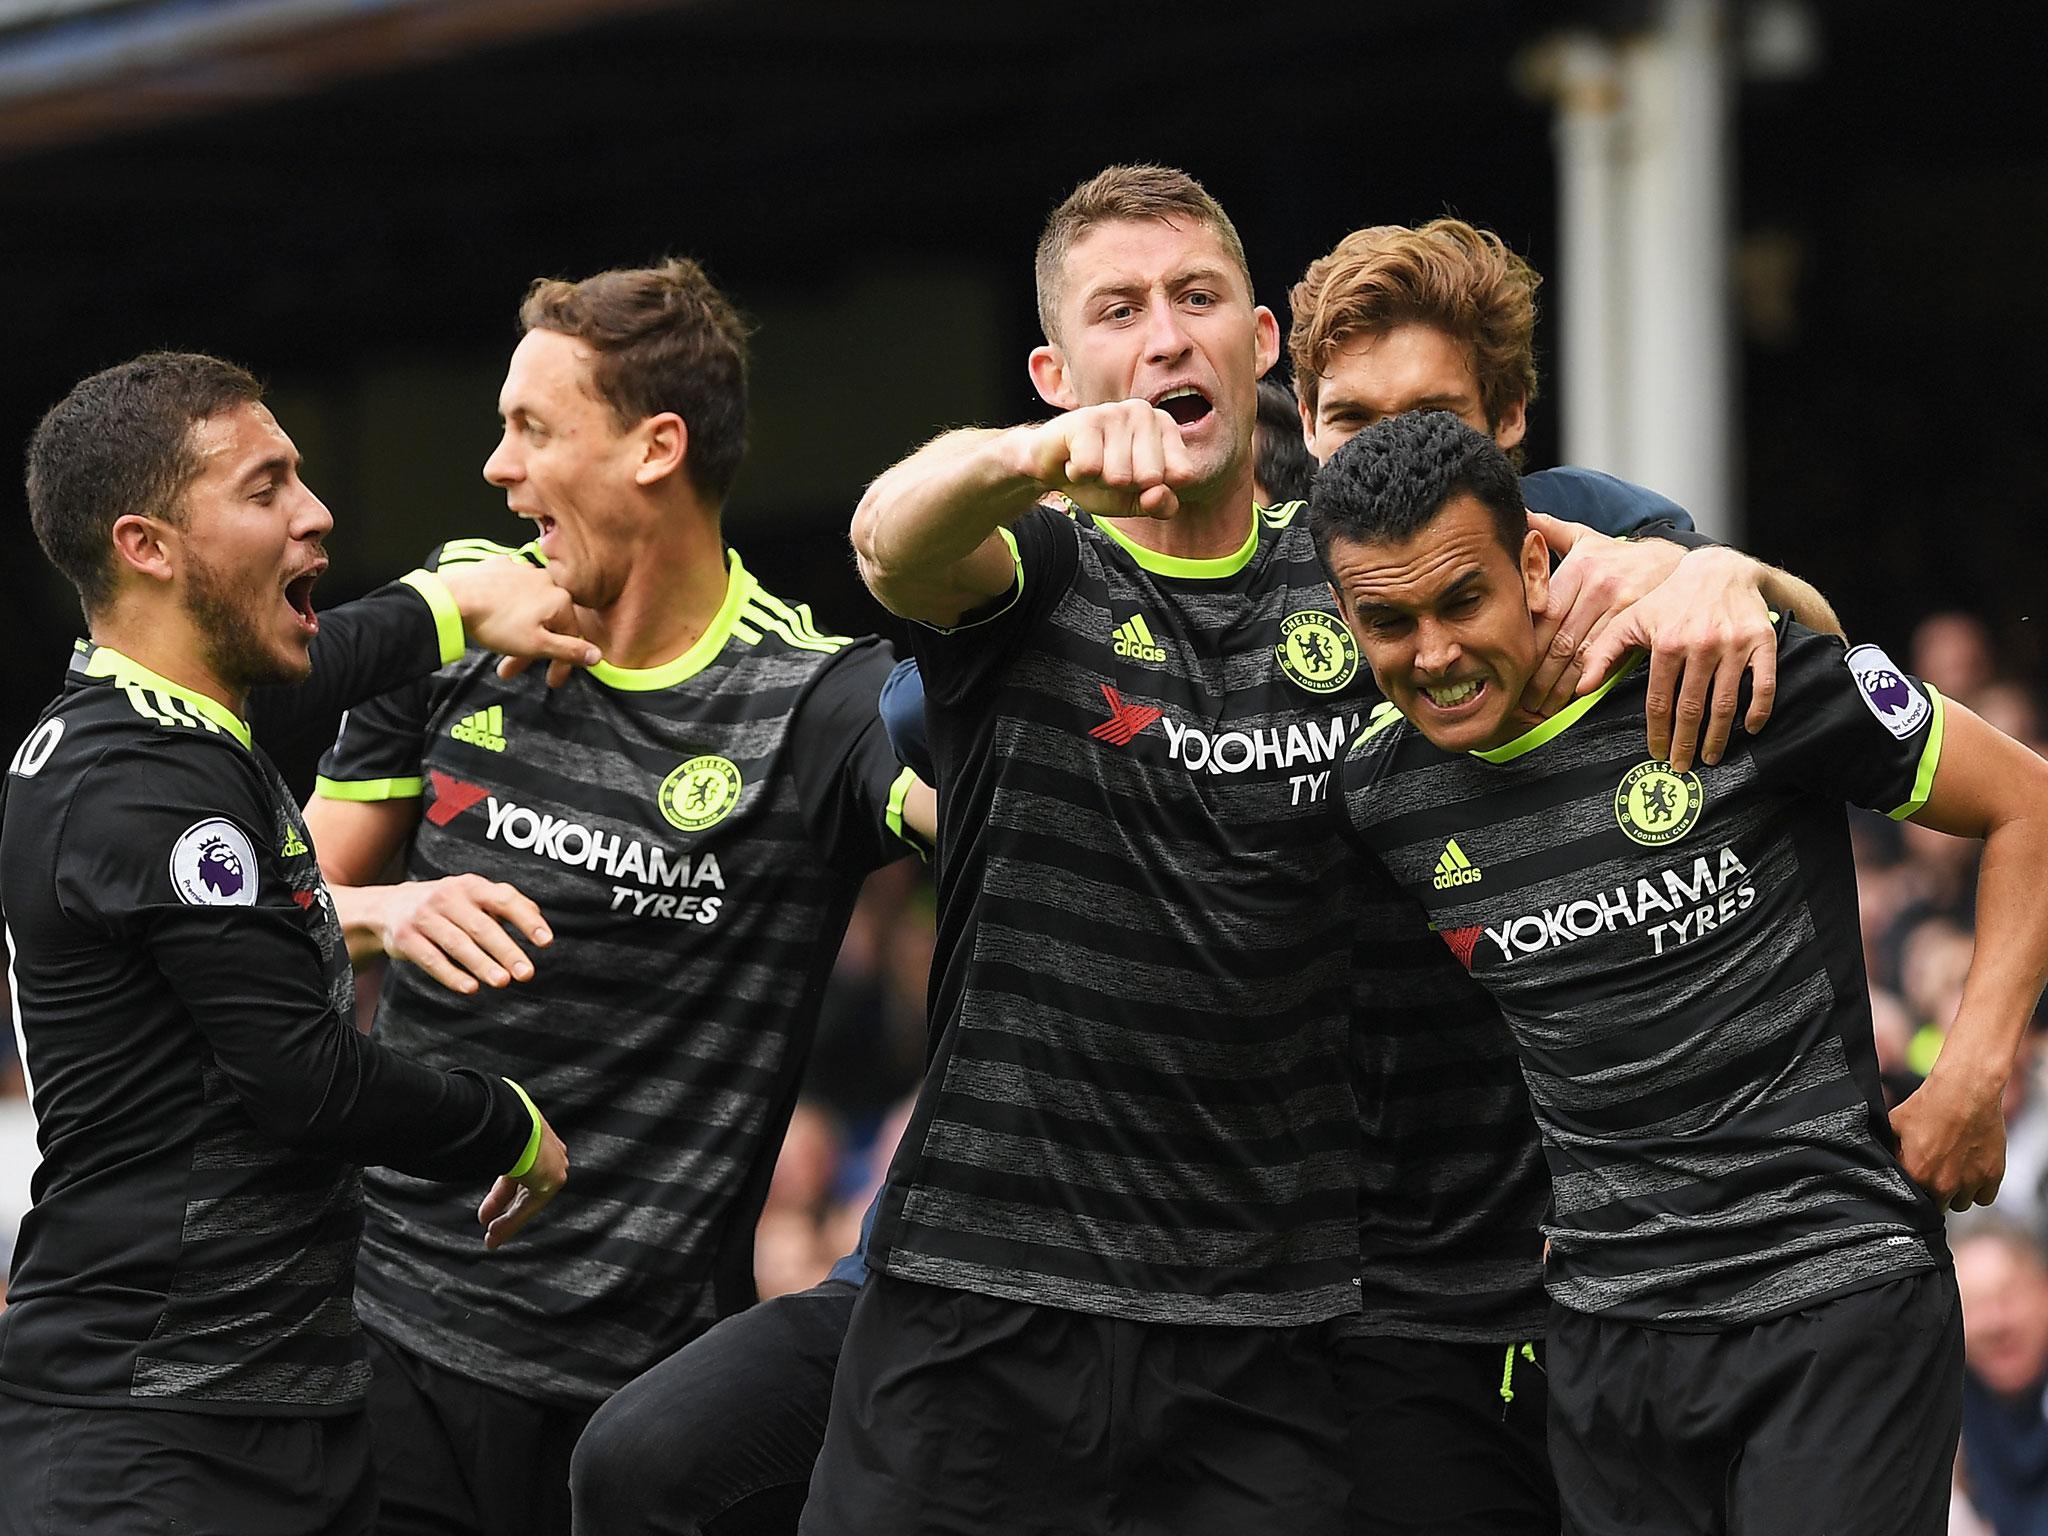 Chelsea won at Goodison Park to take a gigantic step towards the title